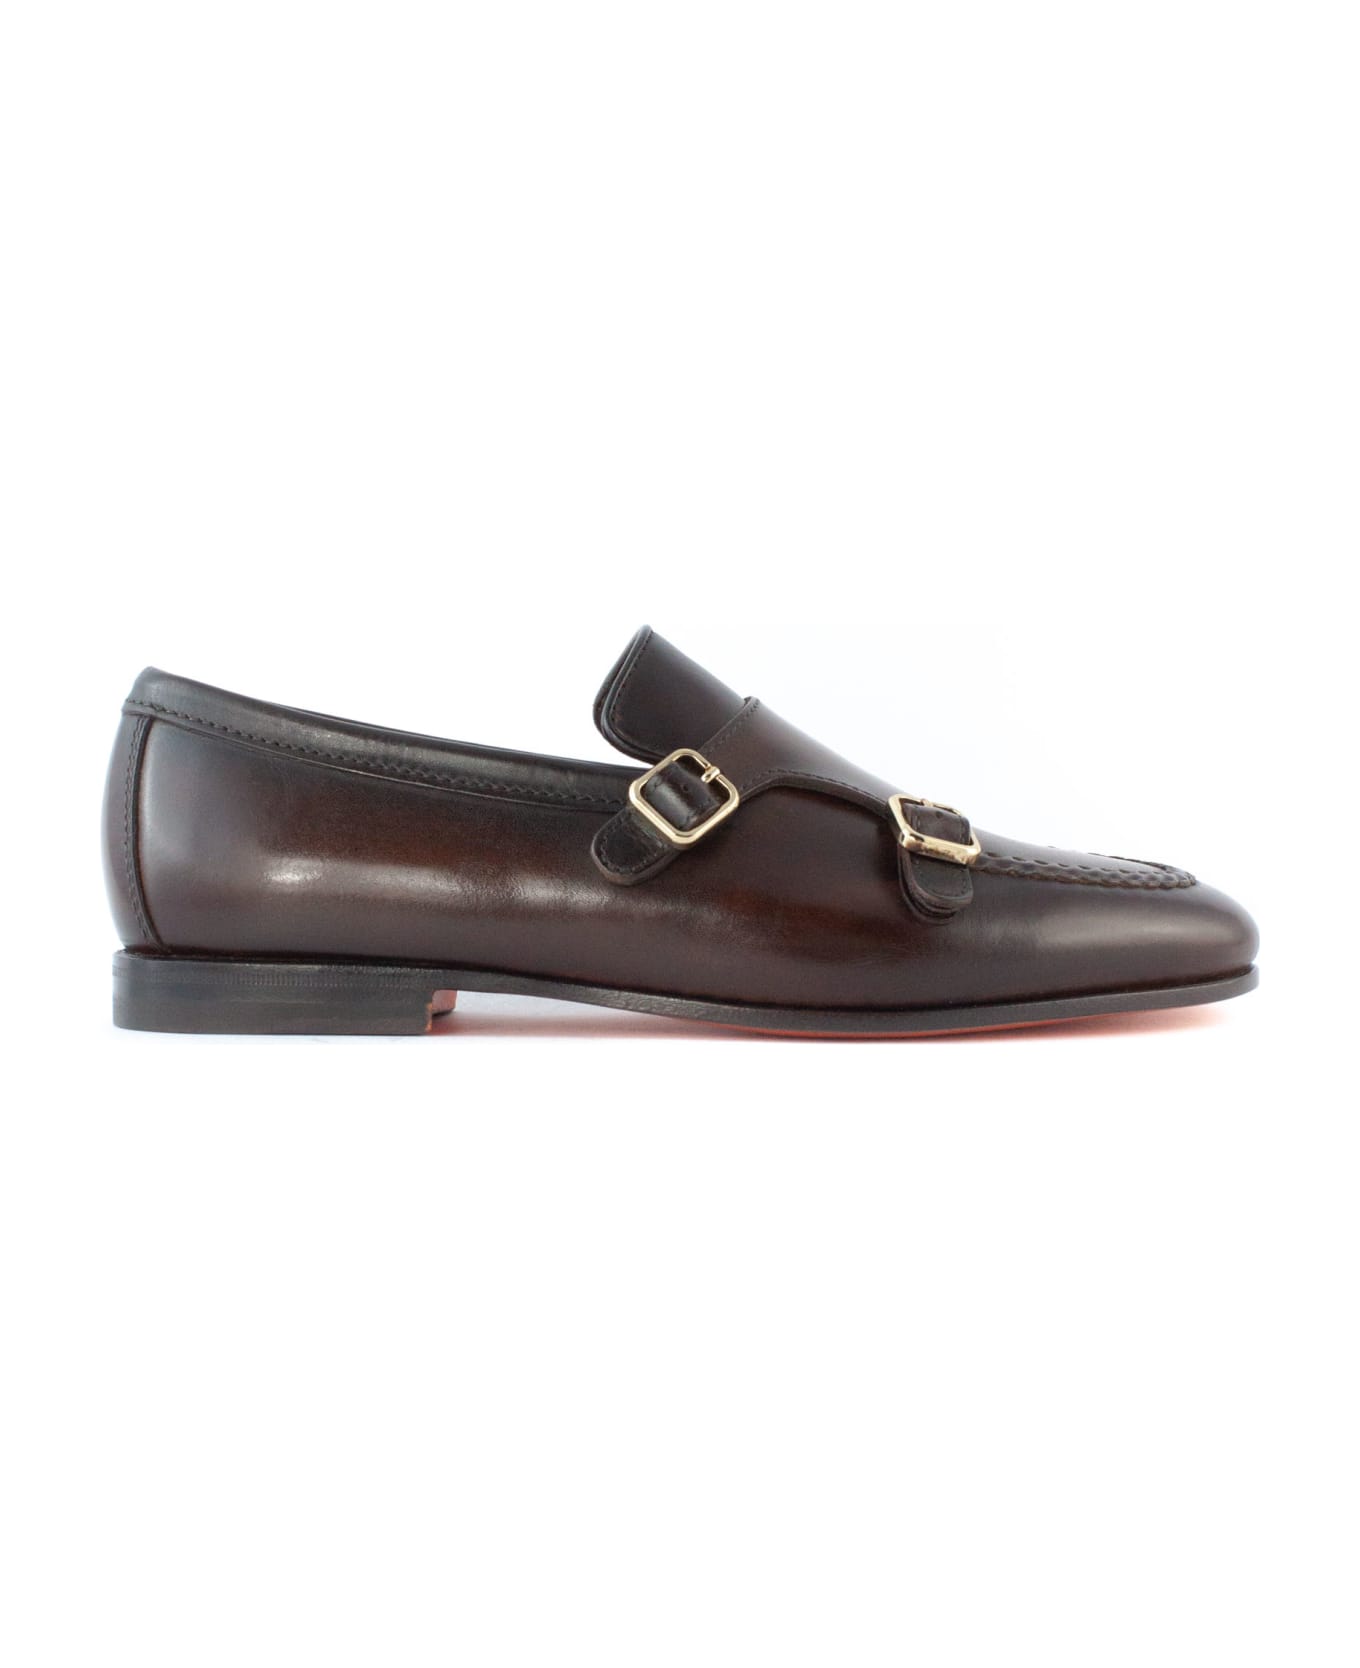 Santoni Brown Leather Double-buckle Loafer - BROWN ローファー＆デッキシューズ